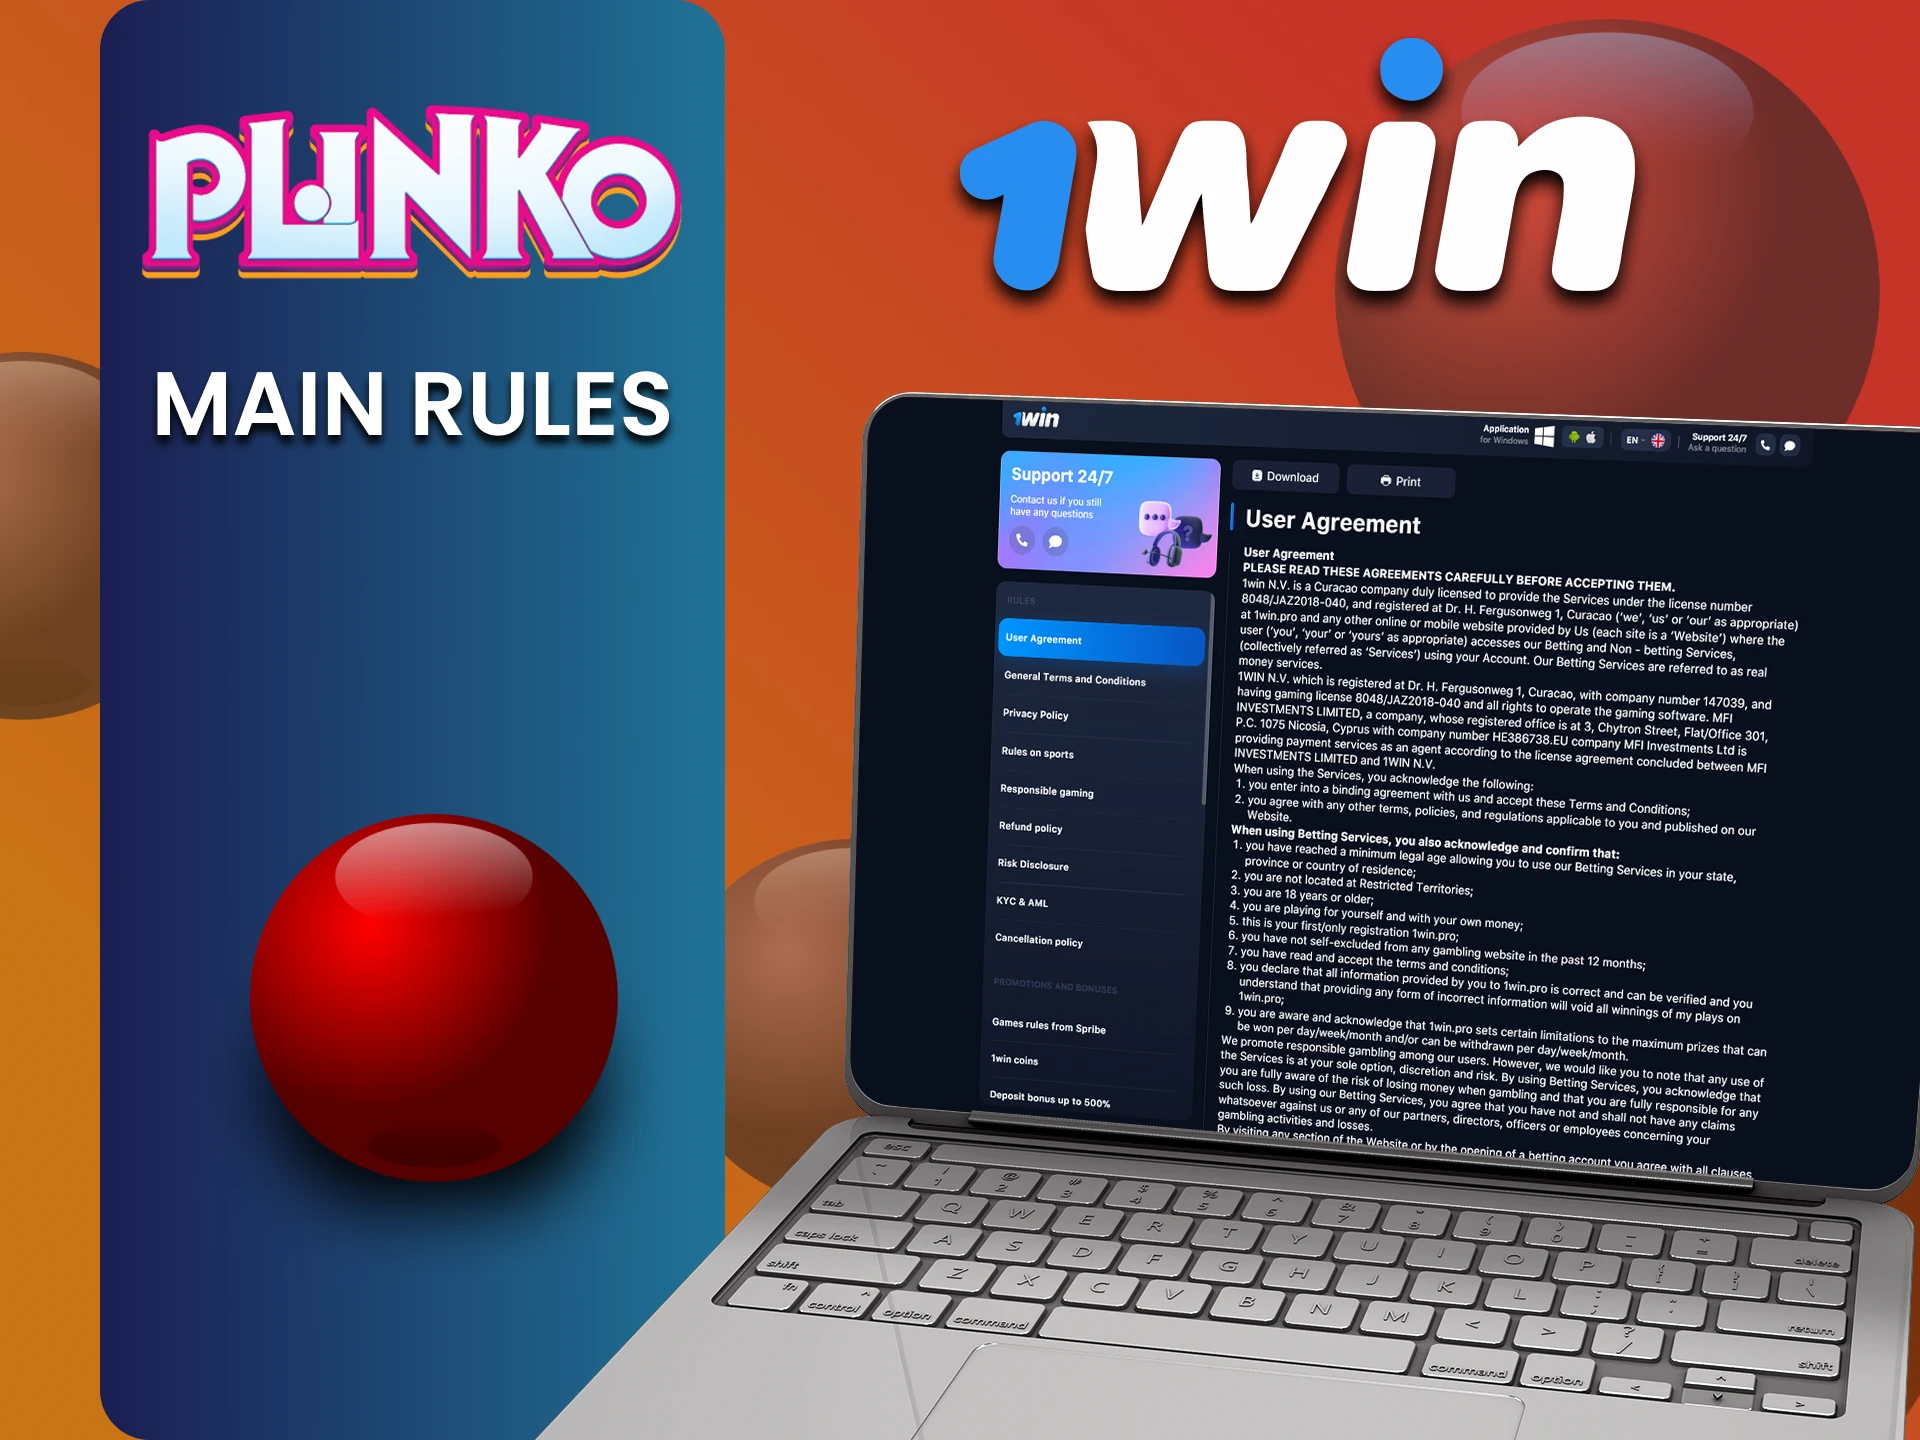 Learn the rules of the 1win service for playing Plinko.